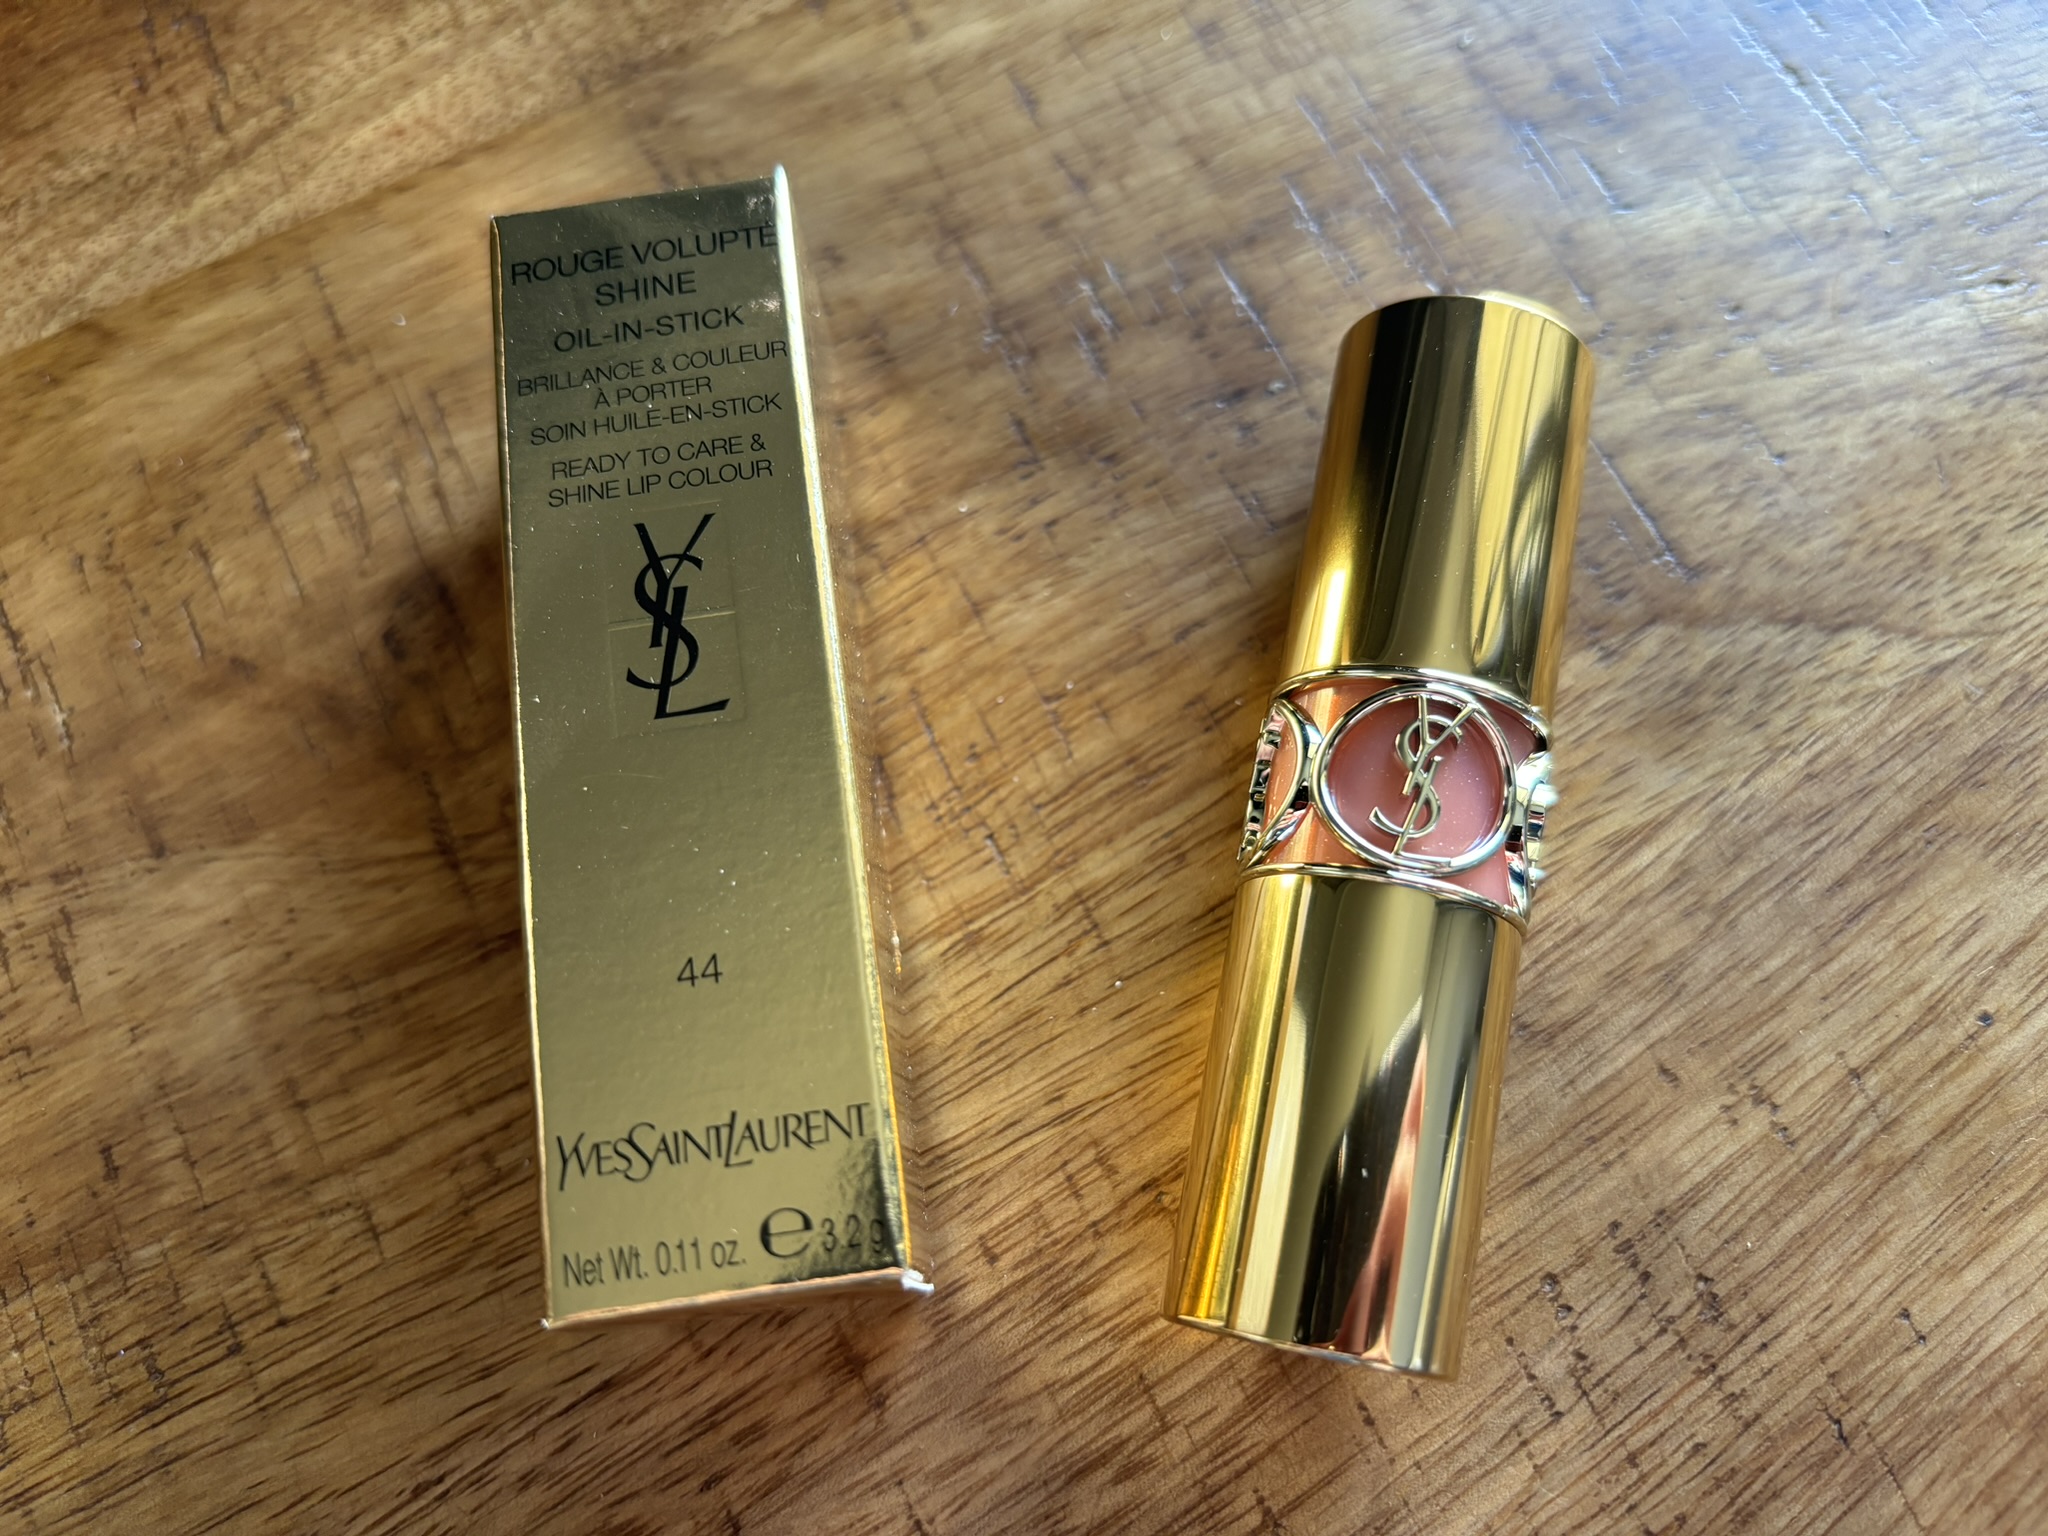 Yves Saint Laurent lipstick in Nude Lavalliere shade